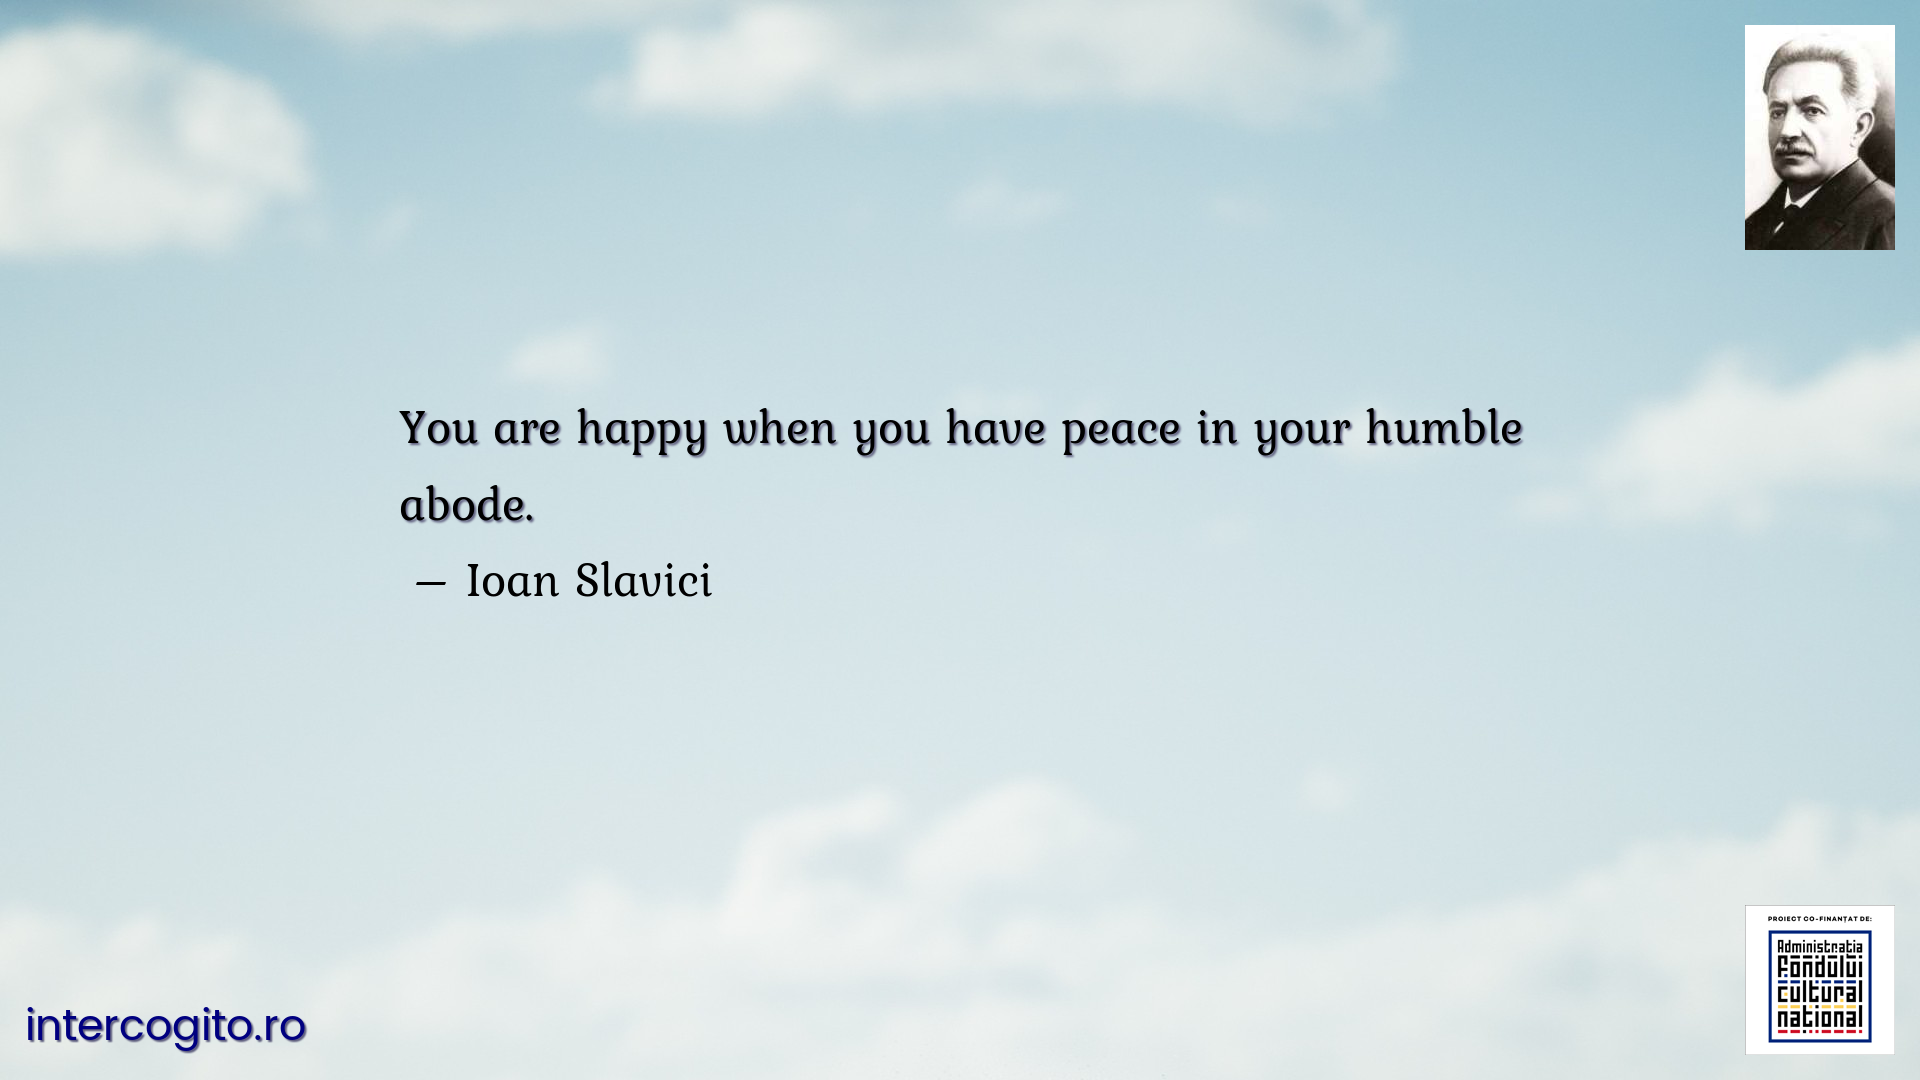 You are happy when you have peace in your humble abode.